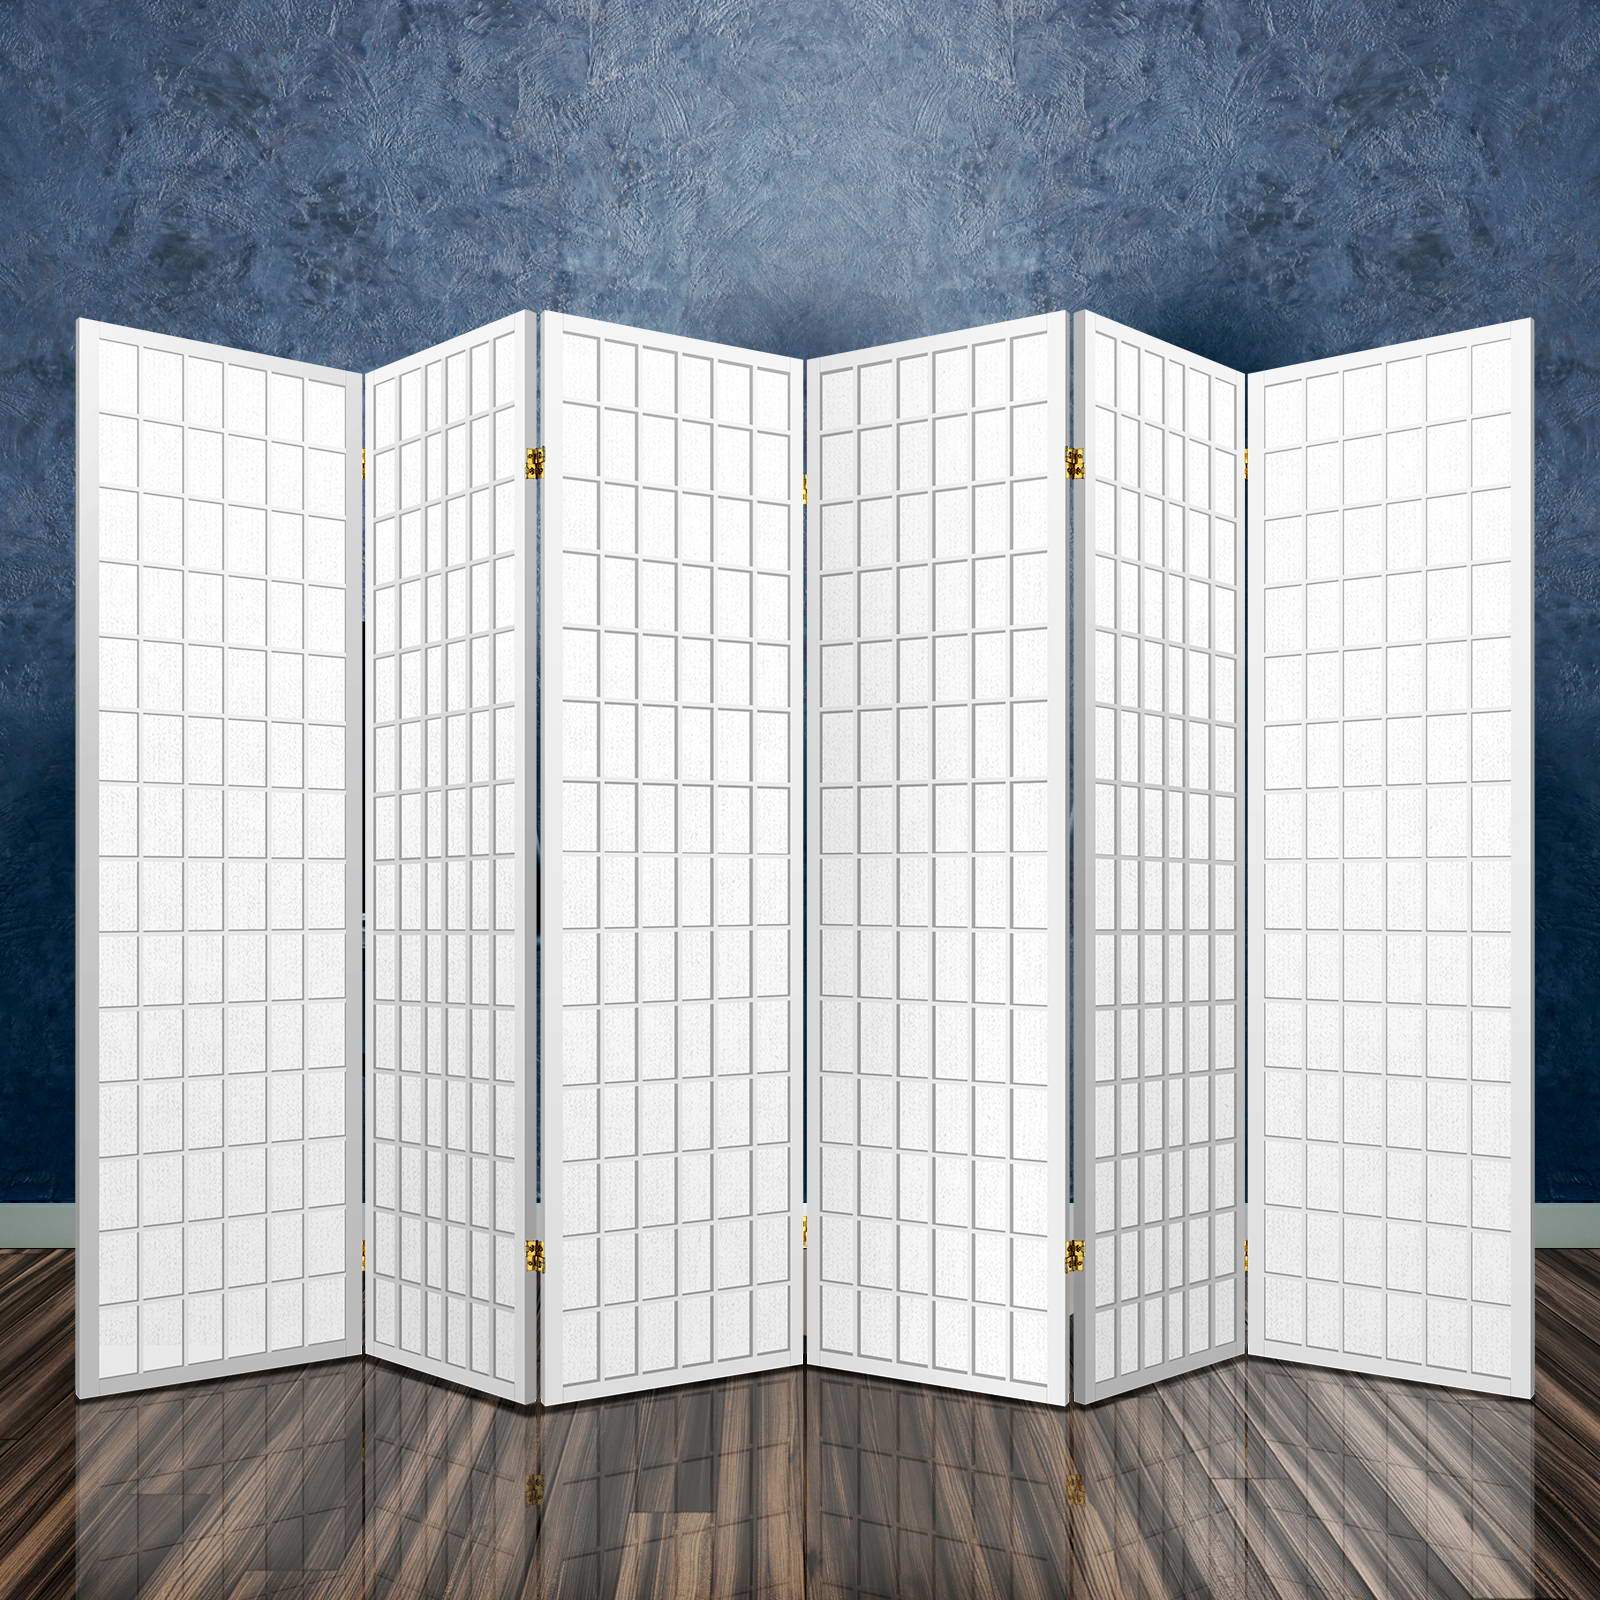 Artiss 6 Panel Room Divider Privacy Screen Foldable Pine Wood Stand White - Newstart Furniture